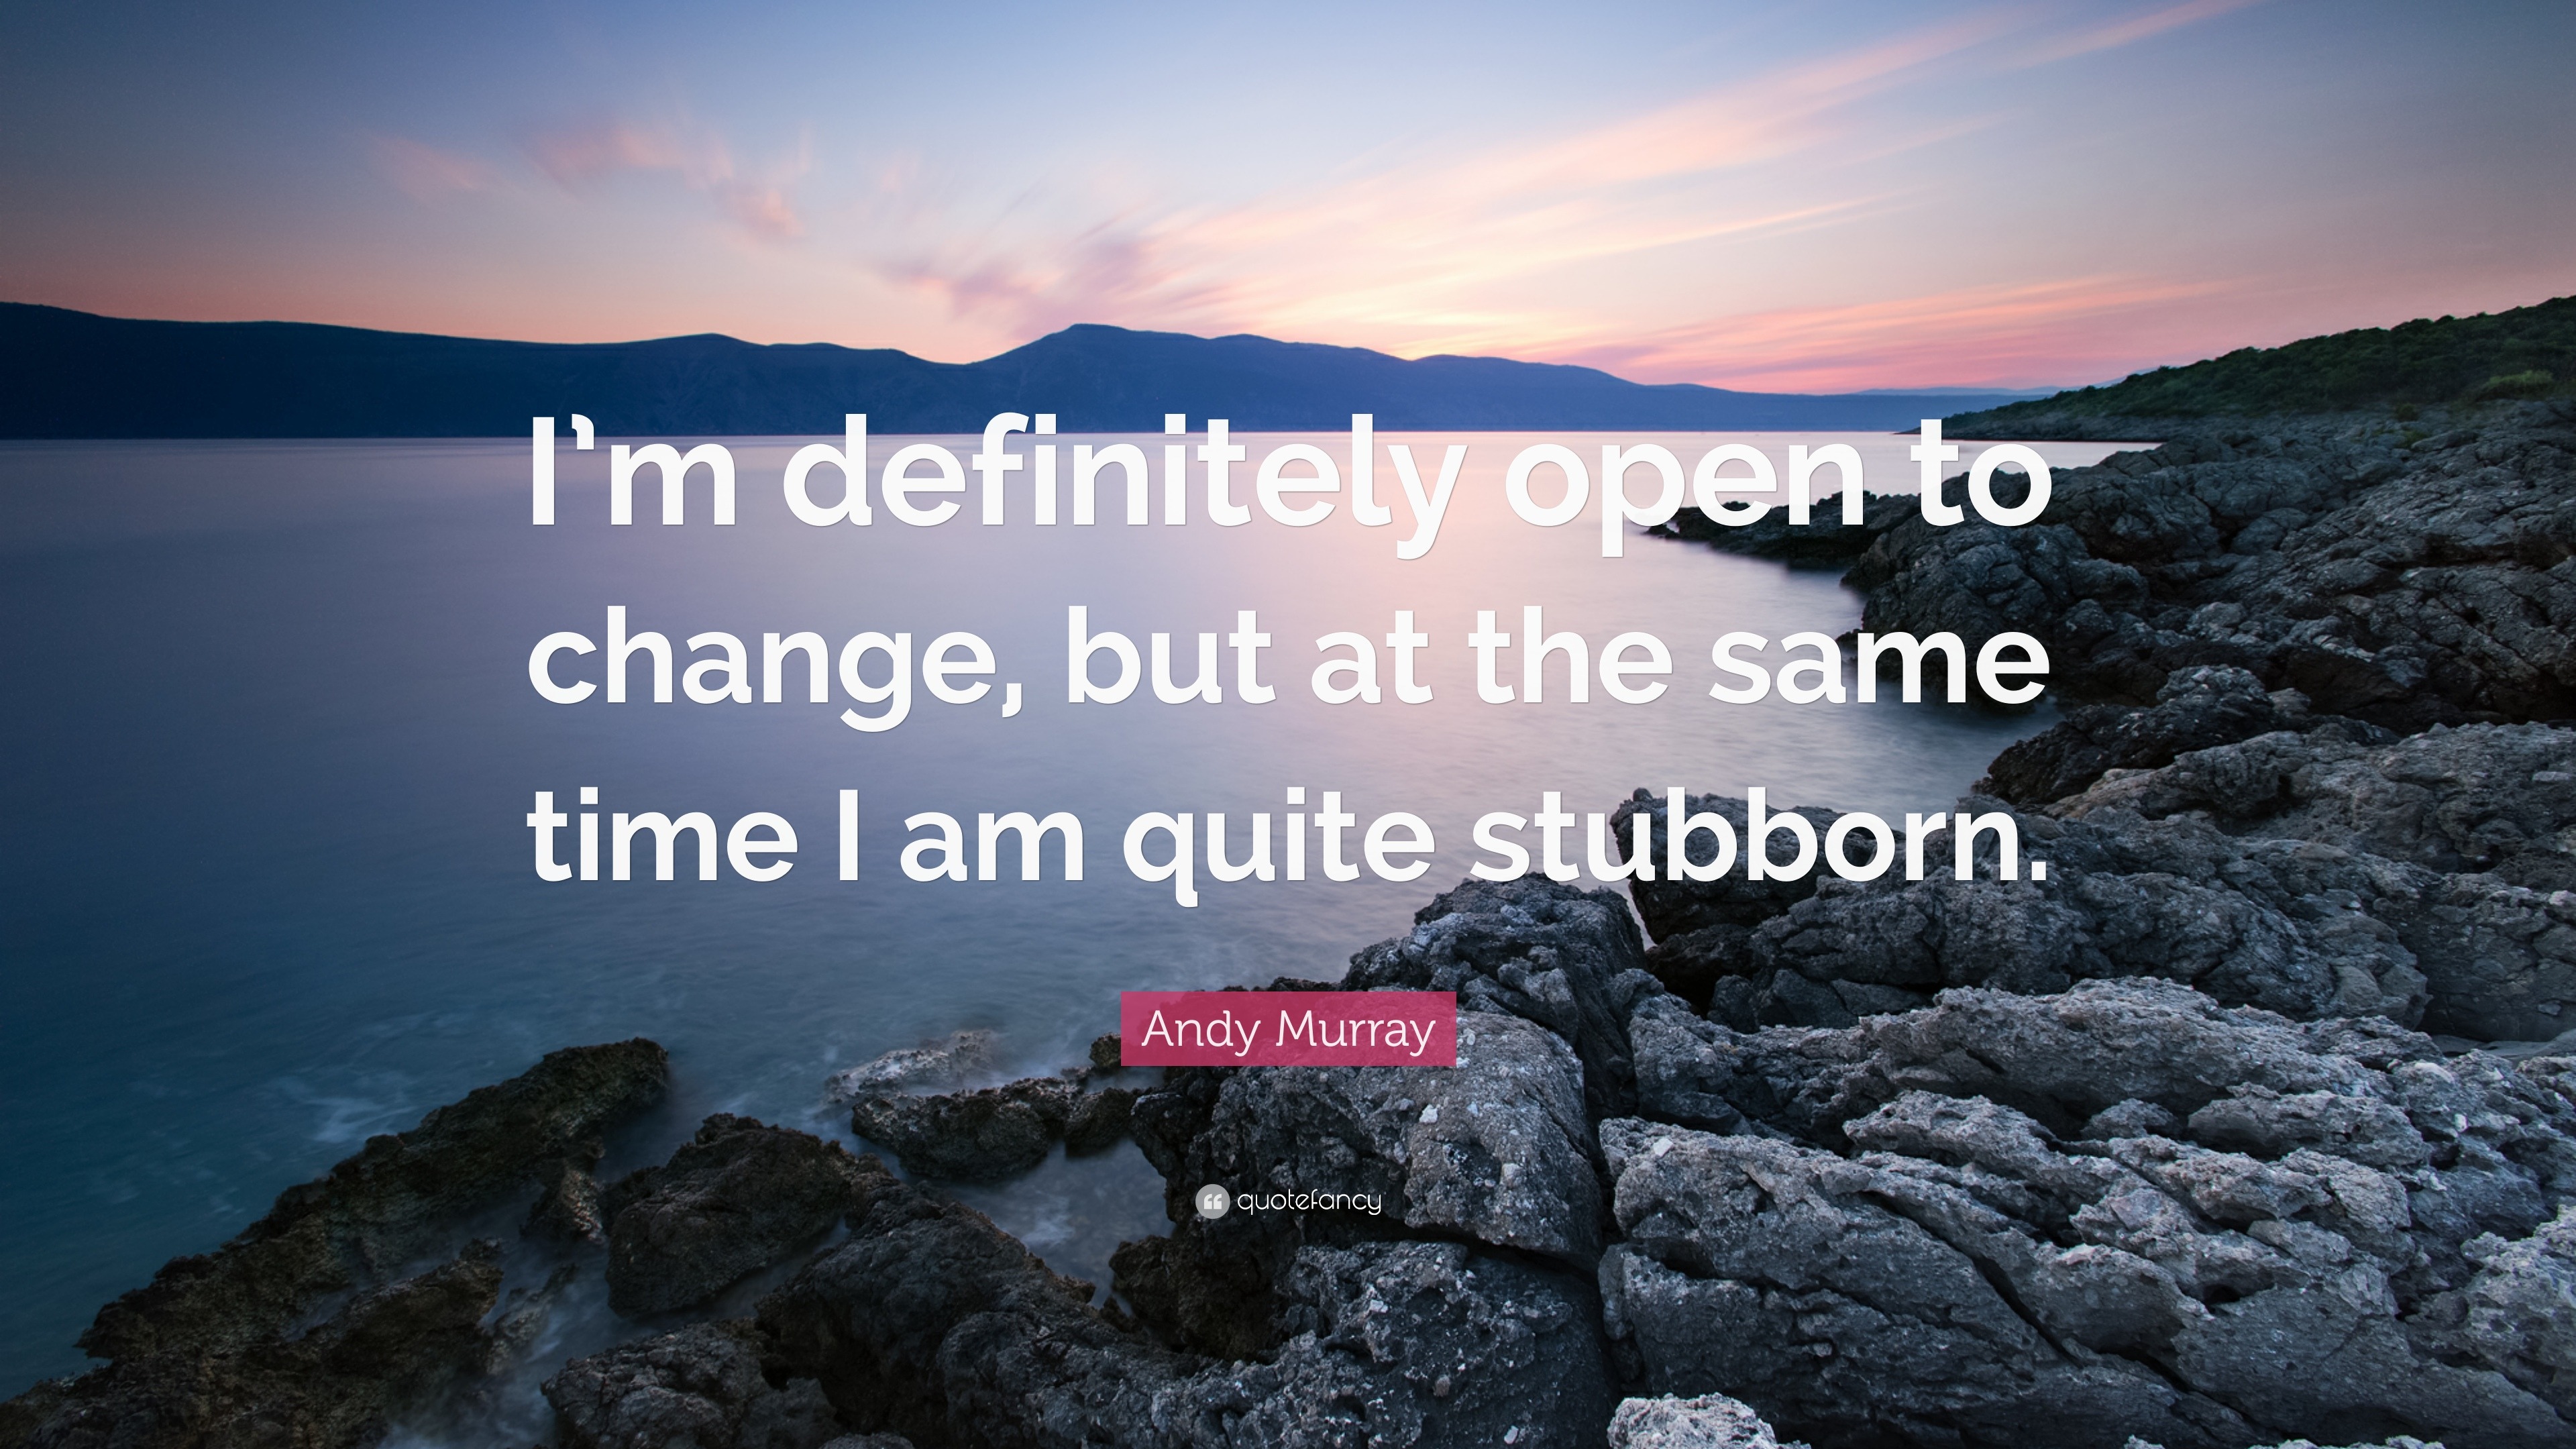 702093-Andy-Murray-Quote-I-m-definitely-open-to-change-but-at-the-same.jpg